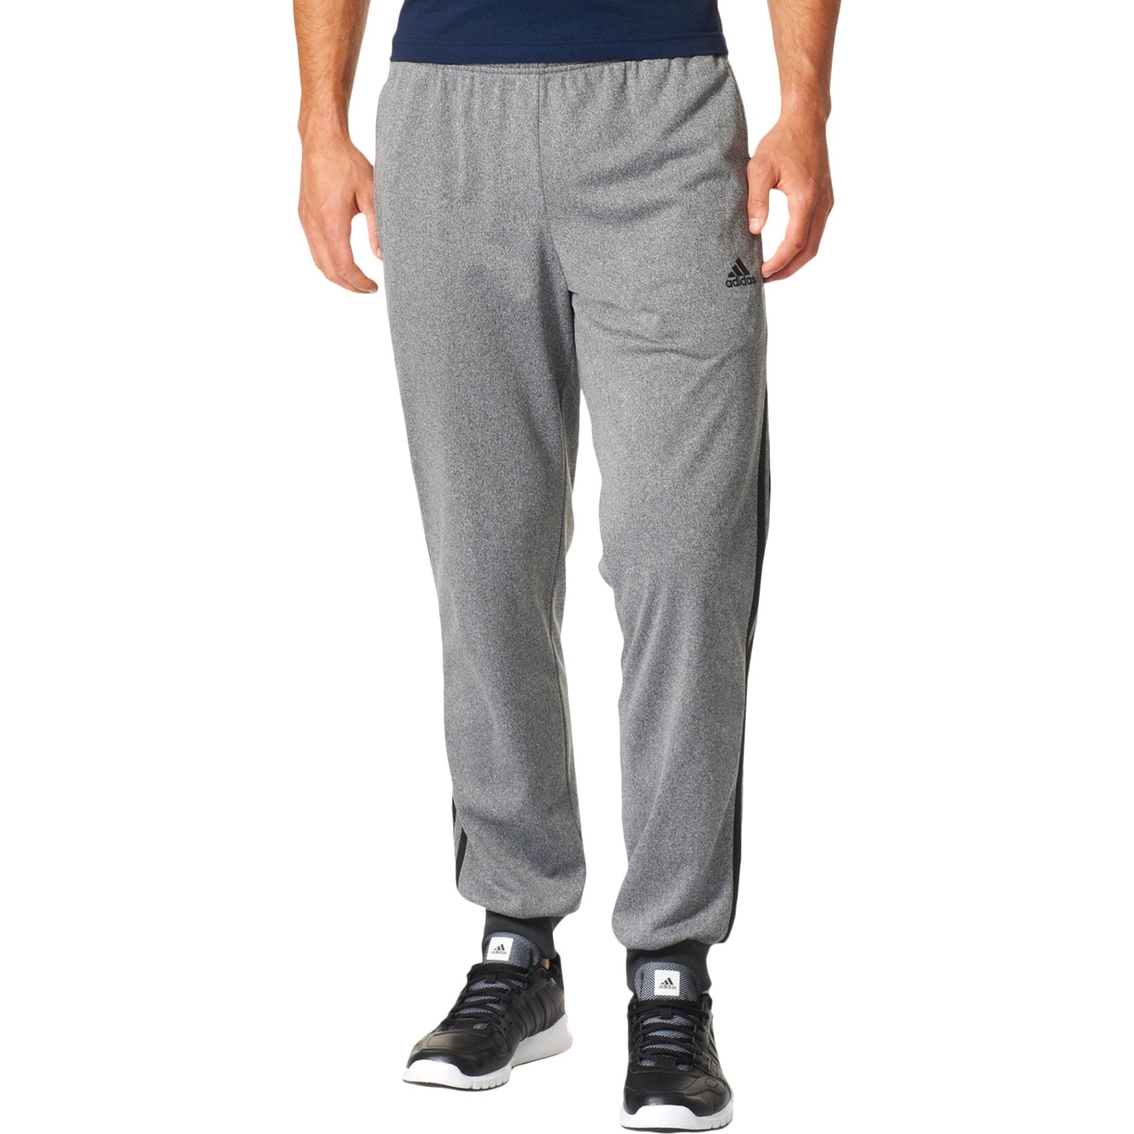 Adidas Essentials 3s Tapered Tricot Pants | Pants | Clothing ...